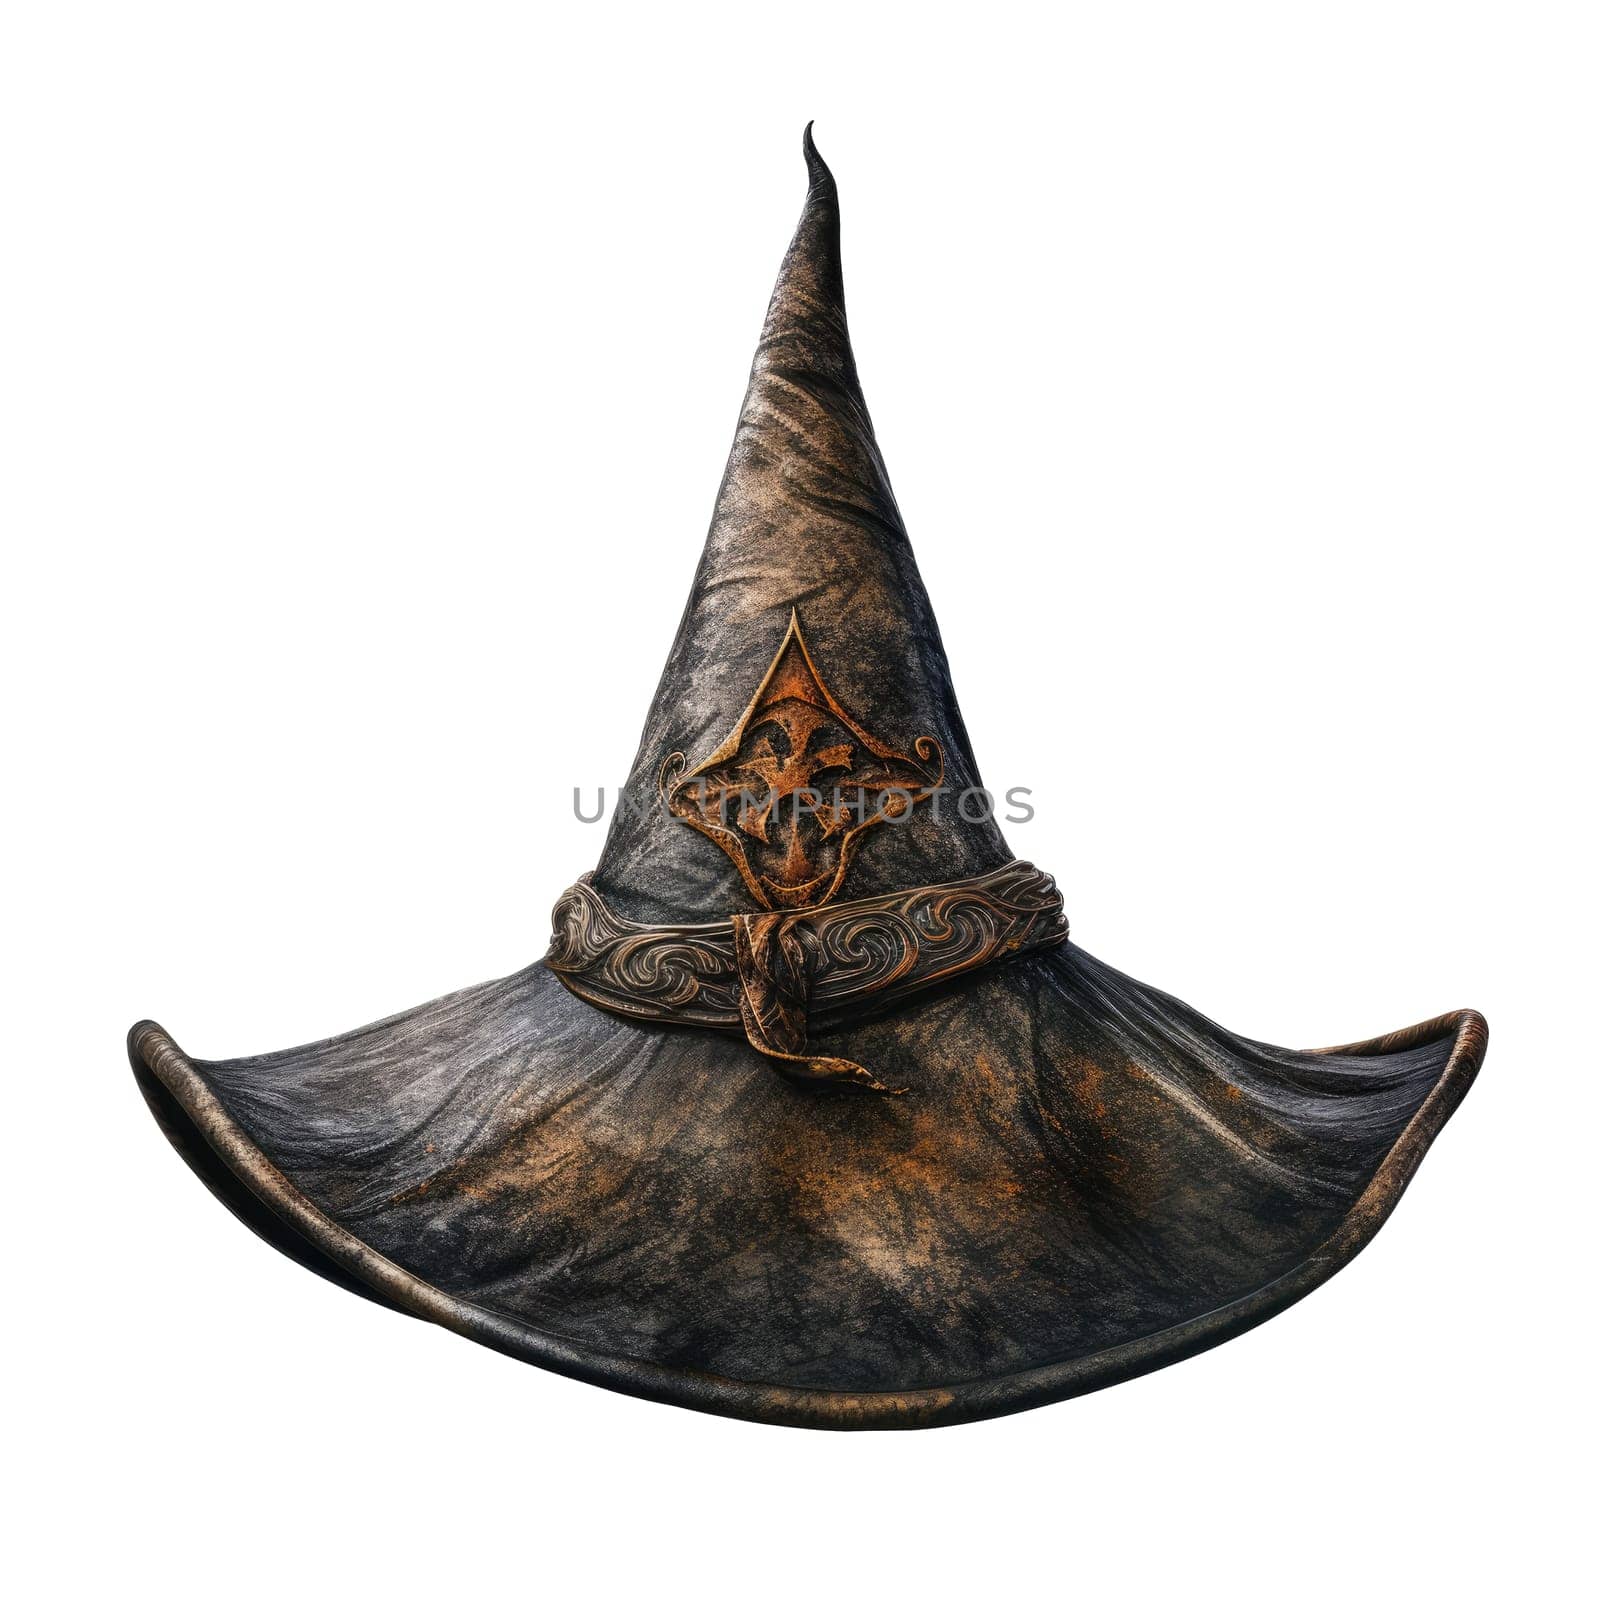 Black halloween witch hat isolated on a white background